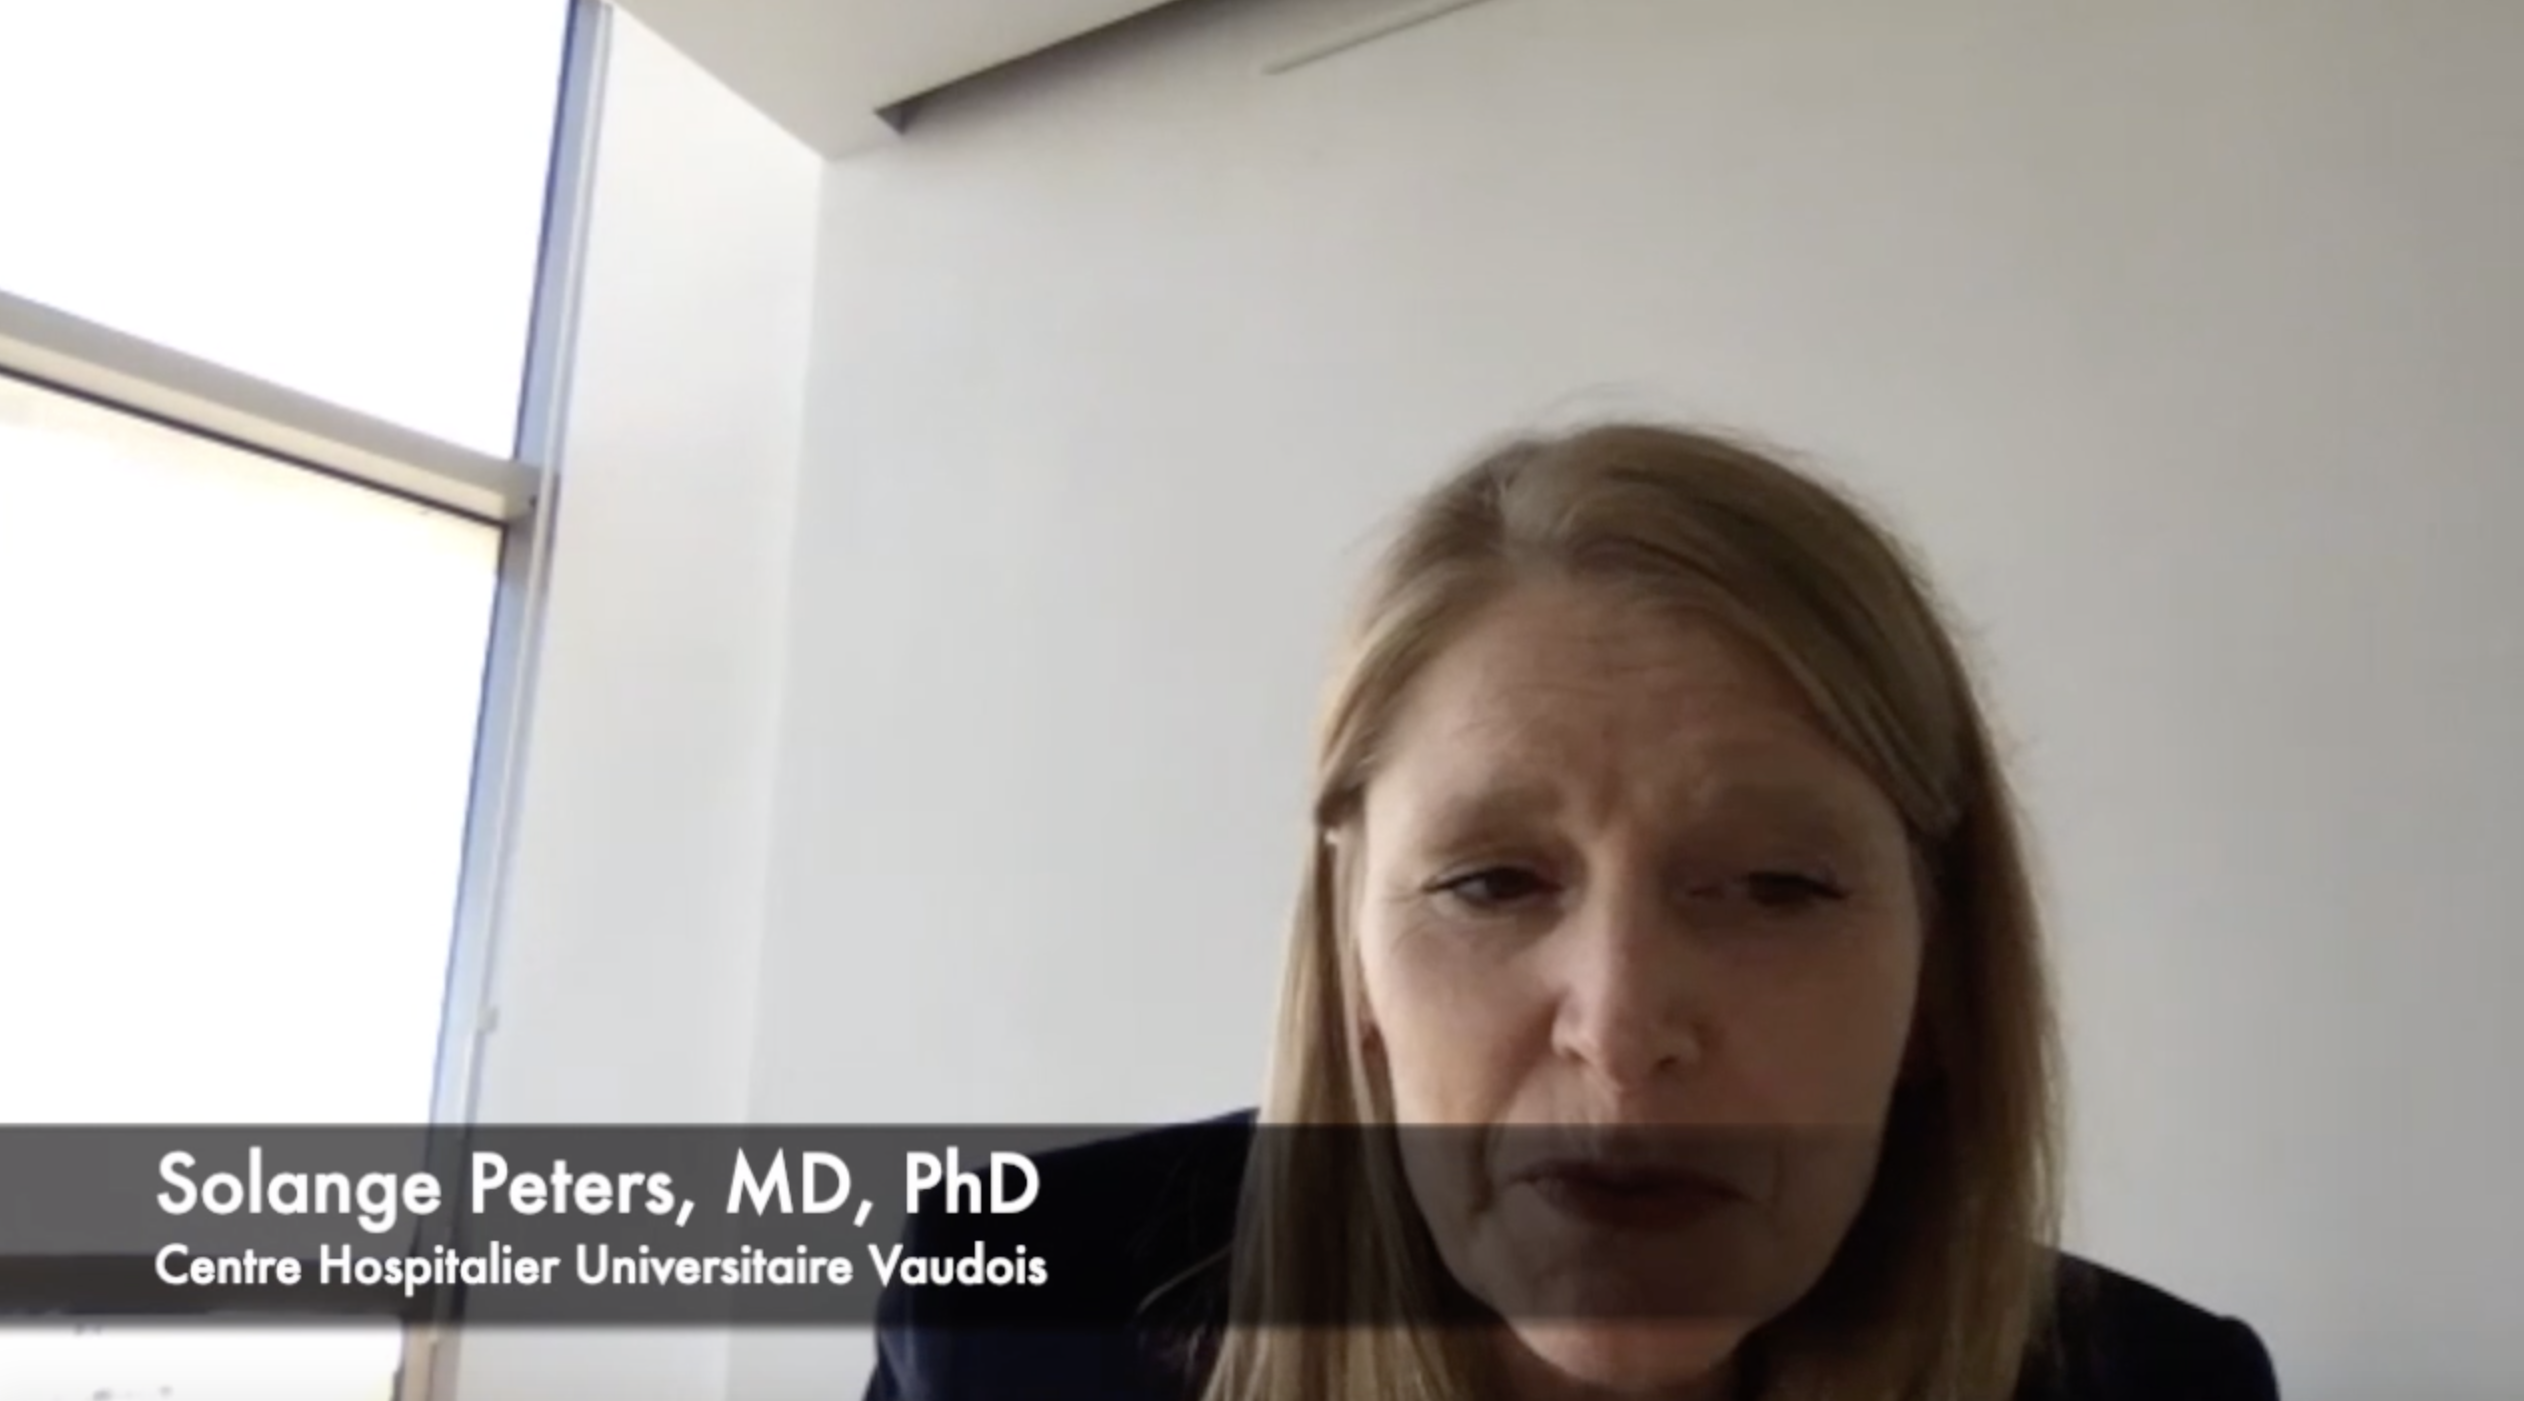 Solange Peters, MD, PhD, detailed several important abstracts from the Presidential Symposia at the 2021 ESMO Congress she believes will be practice changing.